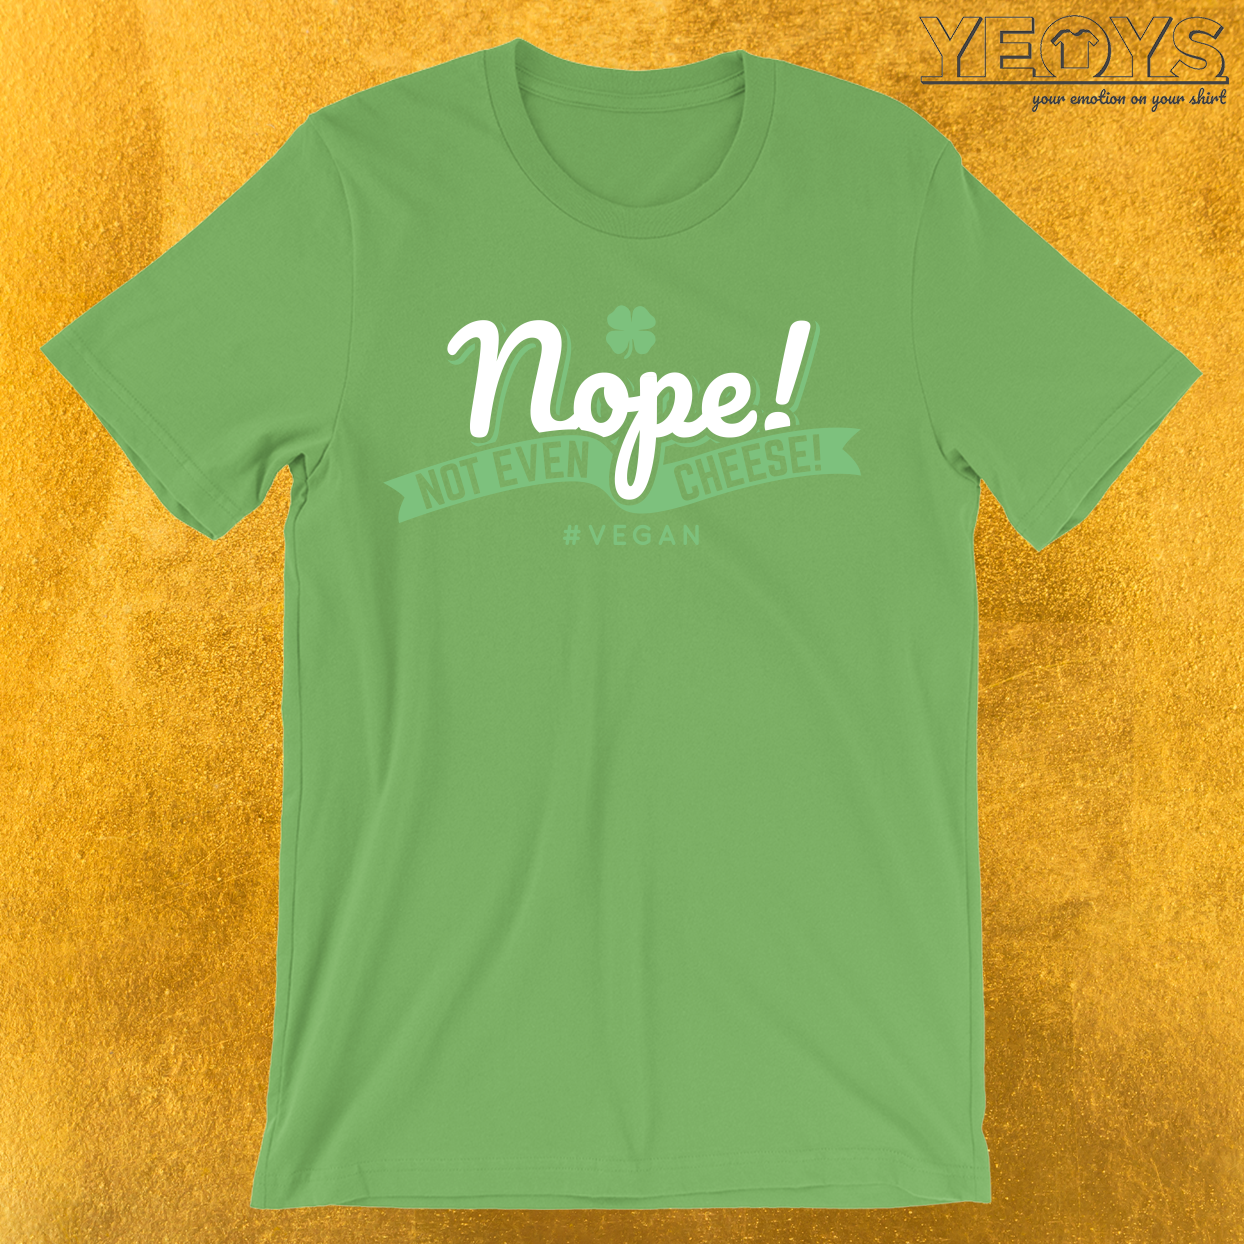 Nope! Not Even Cheese! Vegan AF T-Shirt